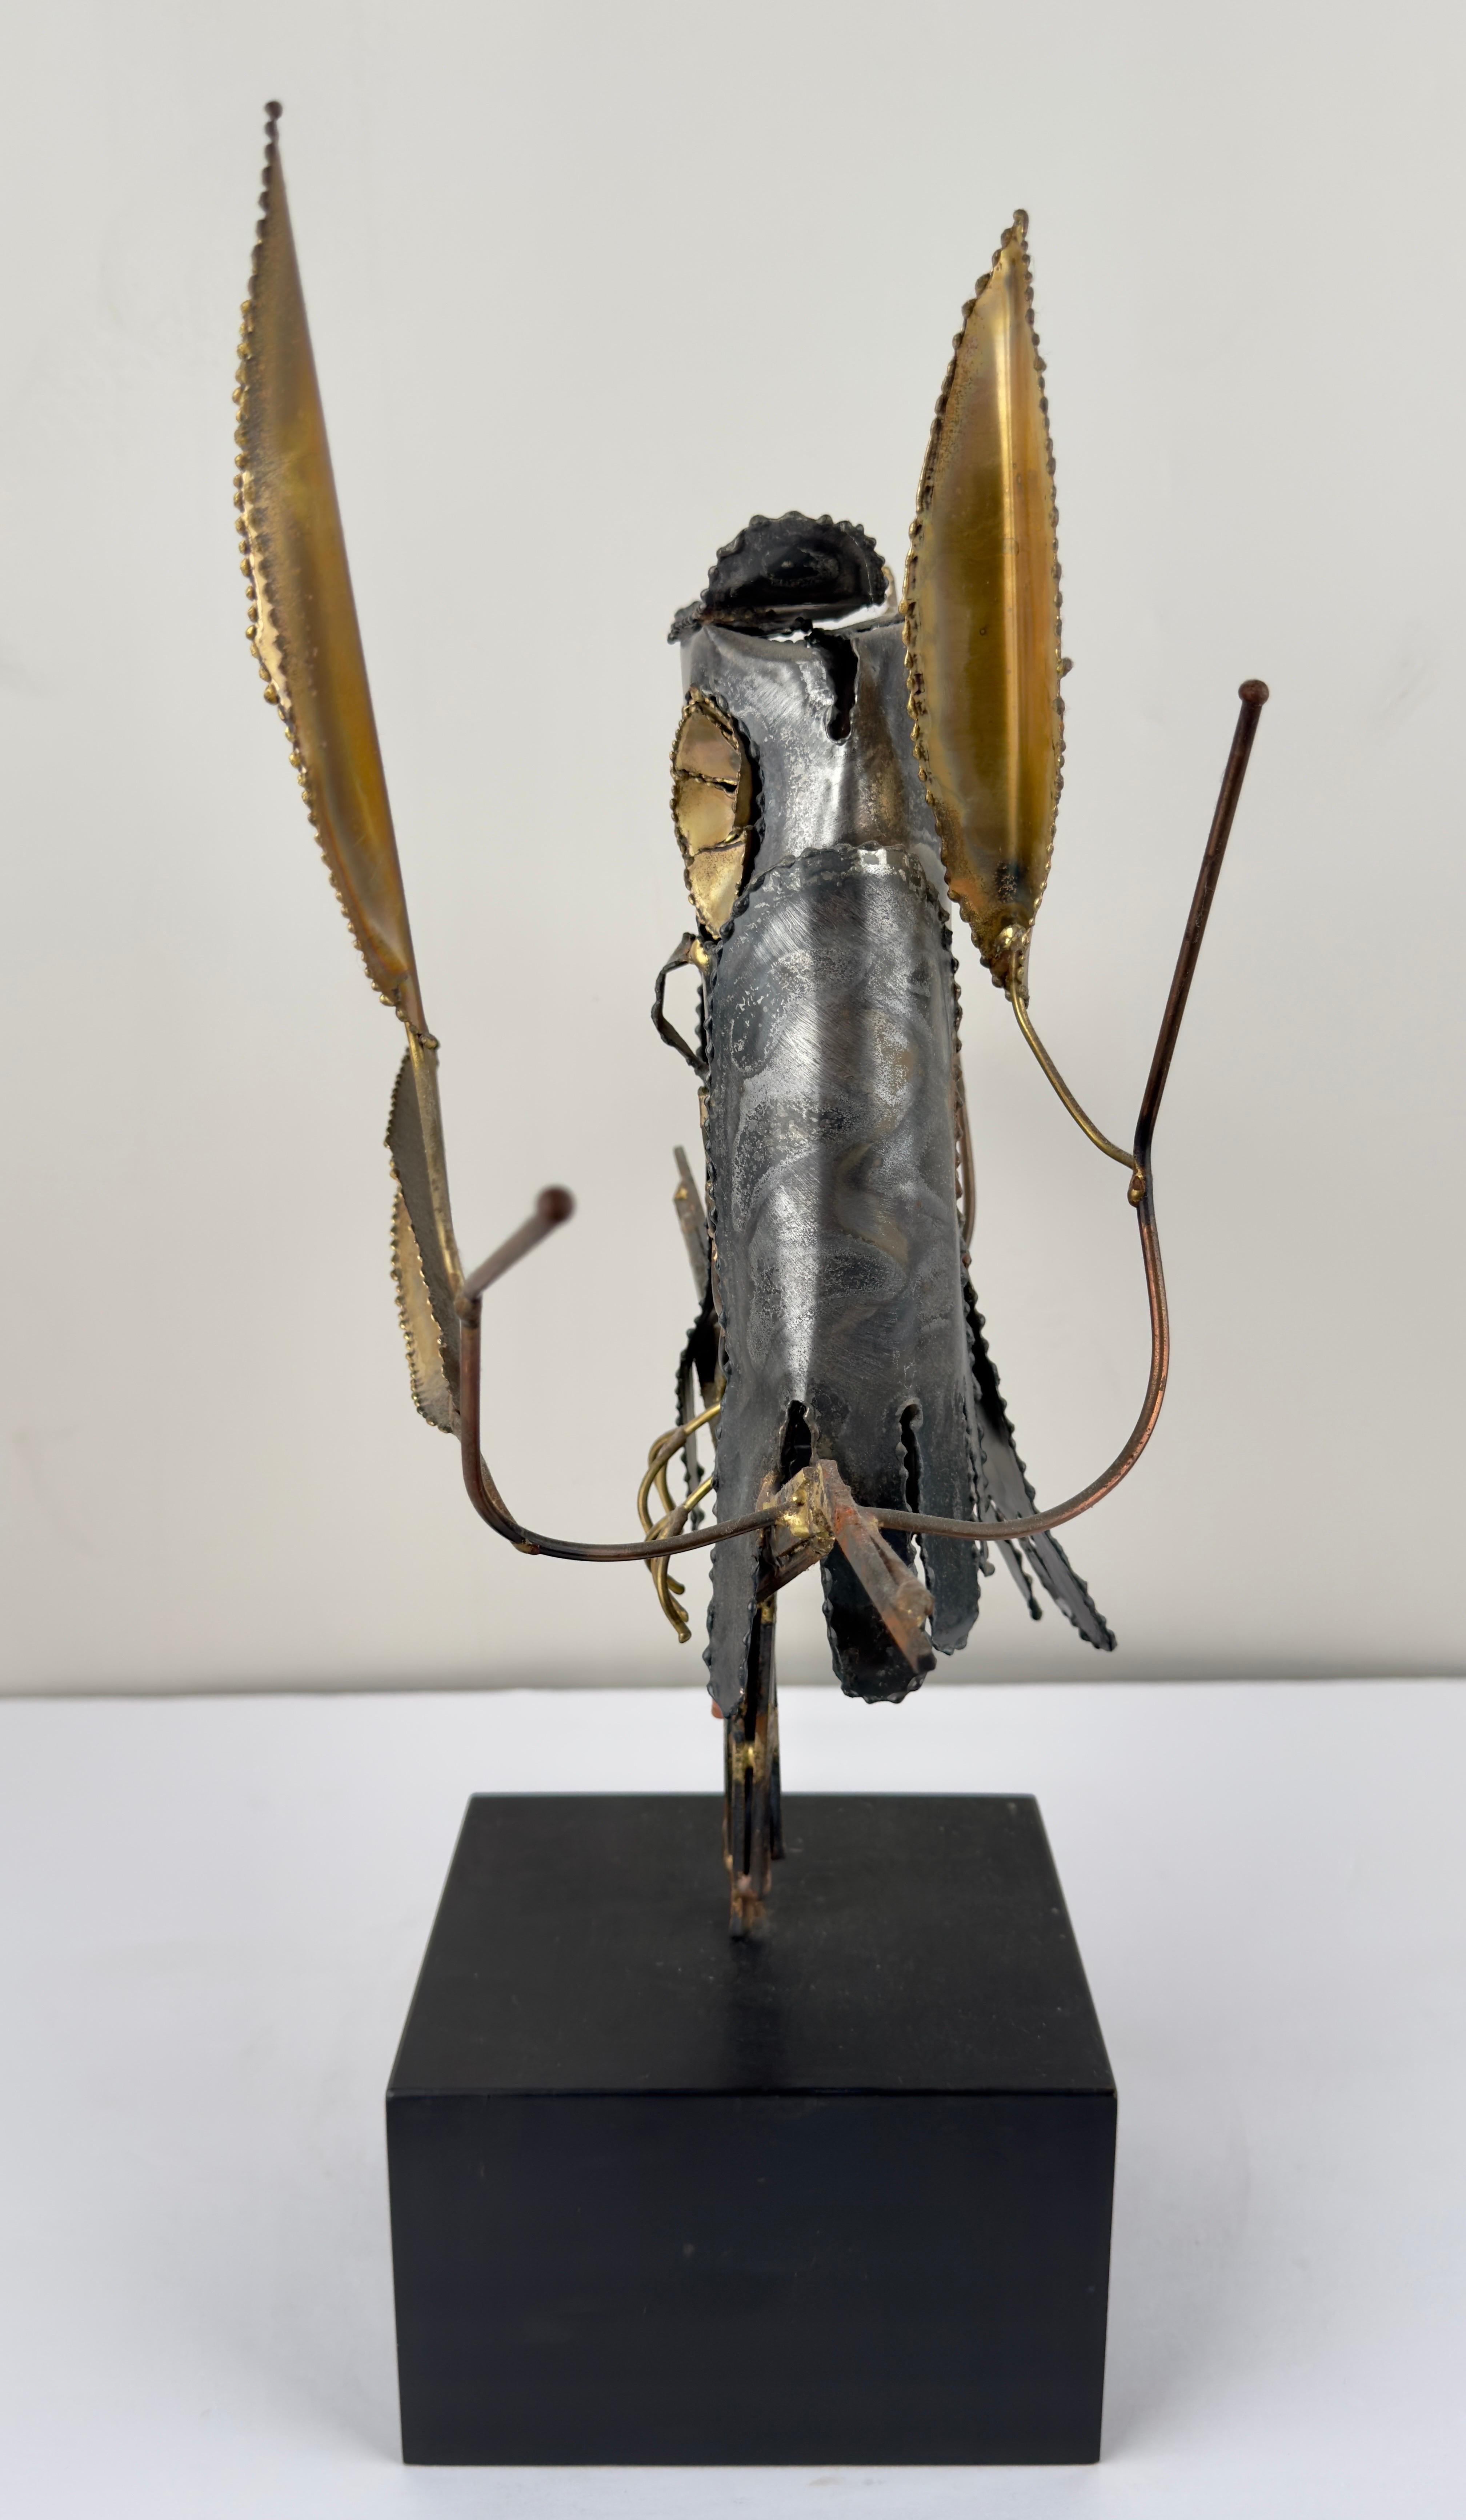 A brutalist Mid- Century Modern sculpture of an owl by Willem DeGroot ( Netherlands, 20th Century ).  The sculpture is made of brass and metal and showing an owl stating on a branch with brass leaves. The sculpture is raised but an acquire black